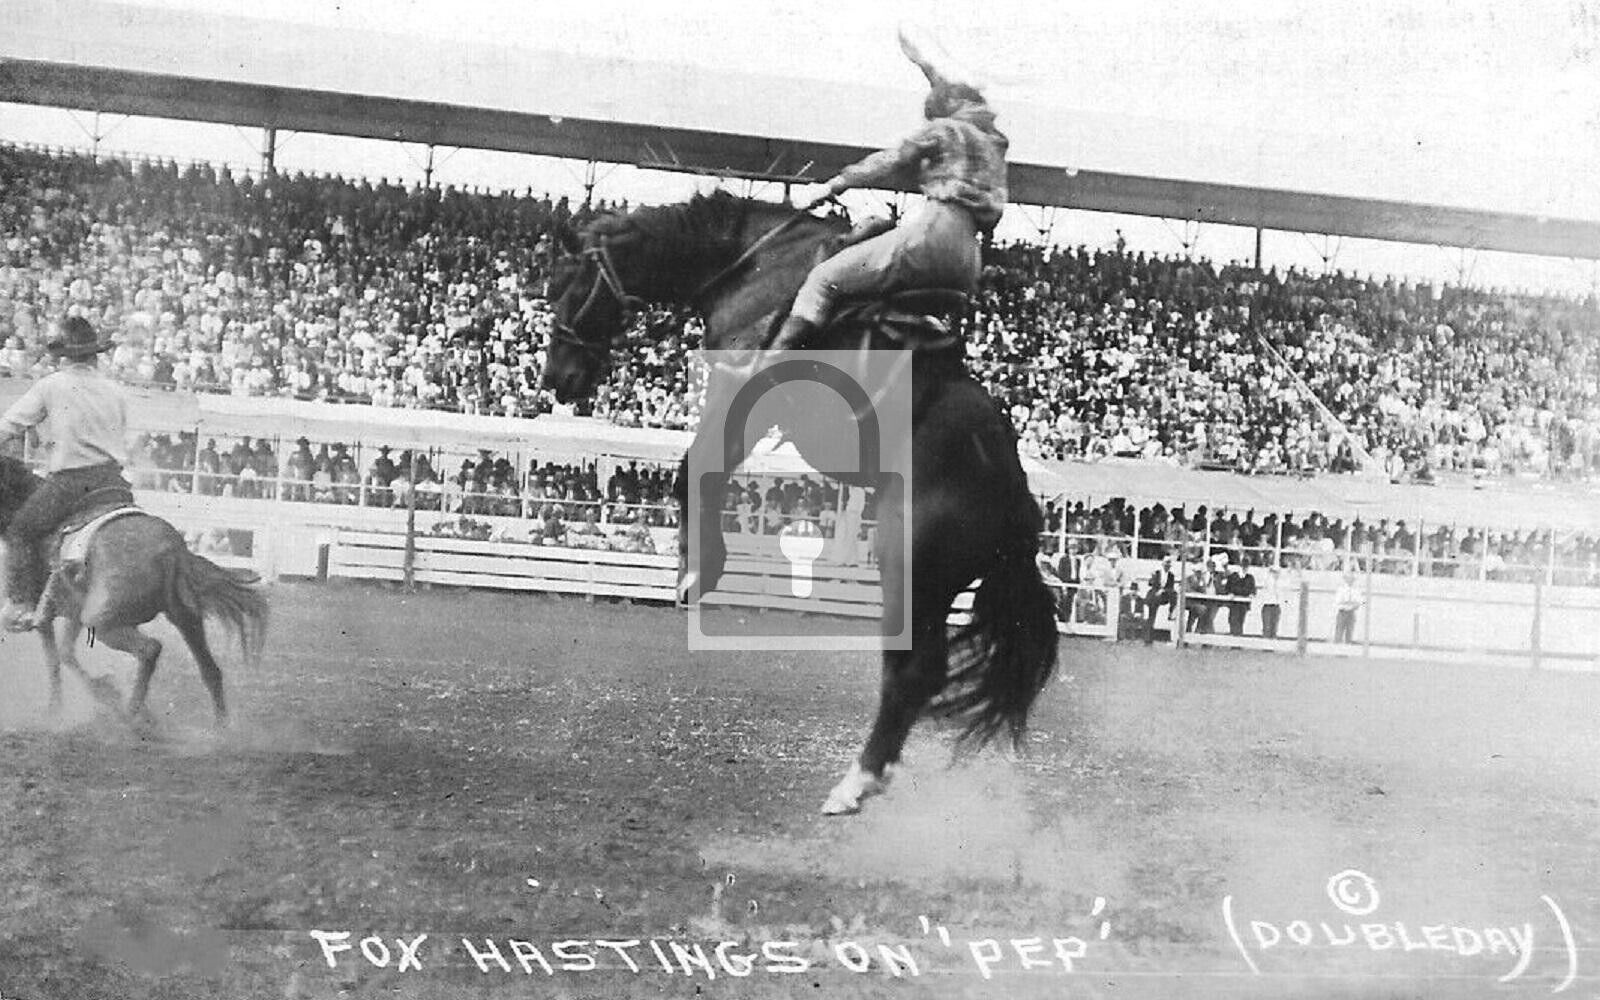 Cowgirl Fox Hastings Riding Horse Bronco Rodeo Reprint Postcard